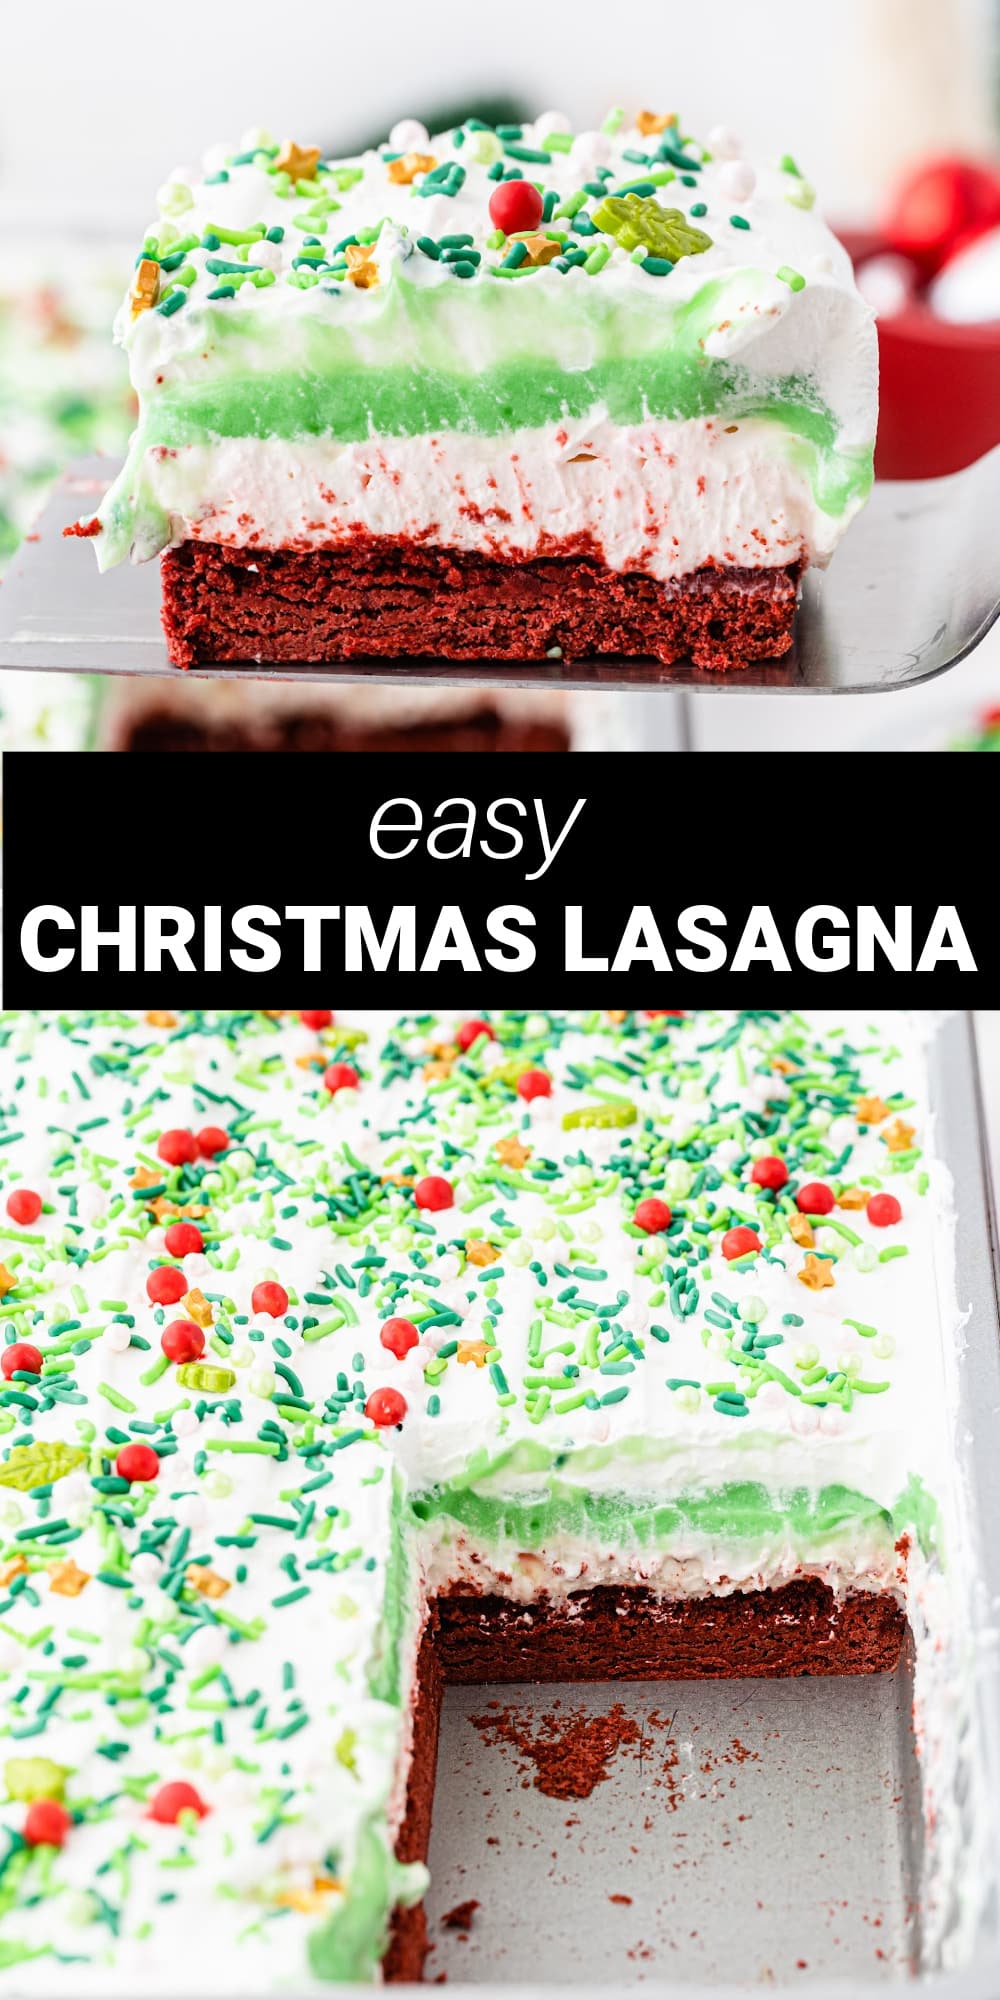 Treat your guests to this rich and delicious Christmas Lasagna. With decadent layers of moist red velvet cake, creamy vanilla pudding, and a sweet cheesecake mixture this festive dessert is guaranteed make a statement at any Christmas dinner or holiday gathering!